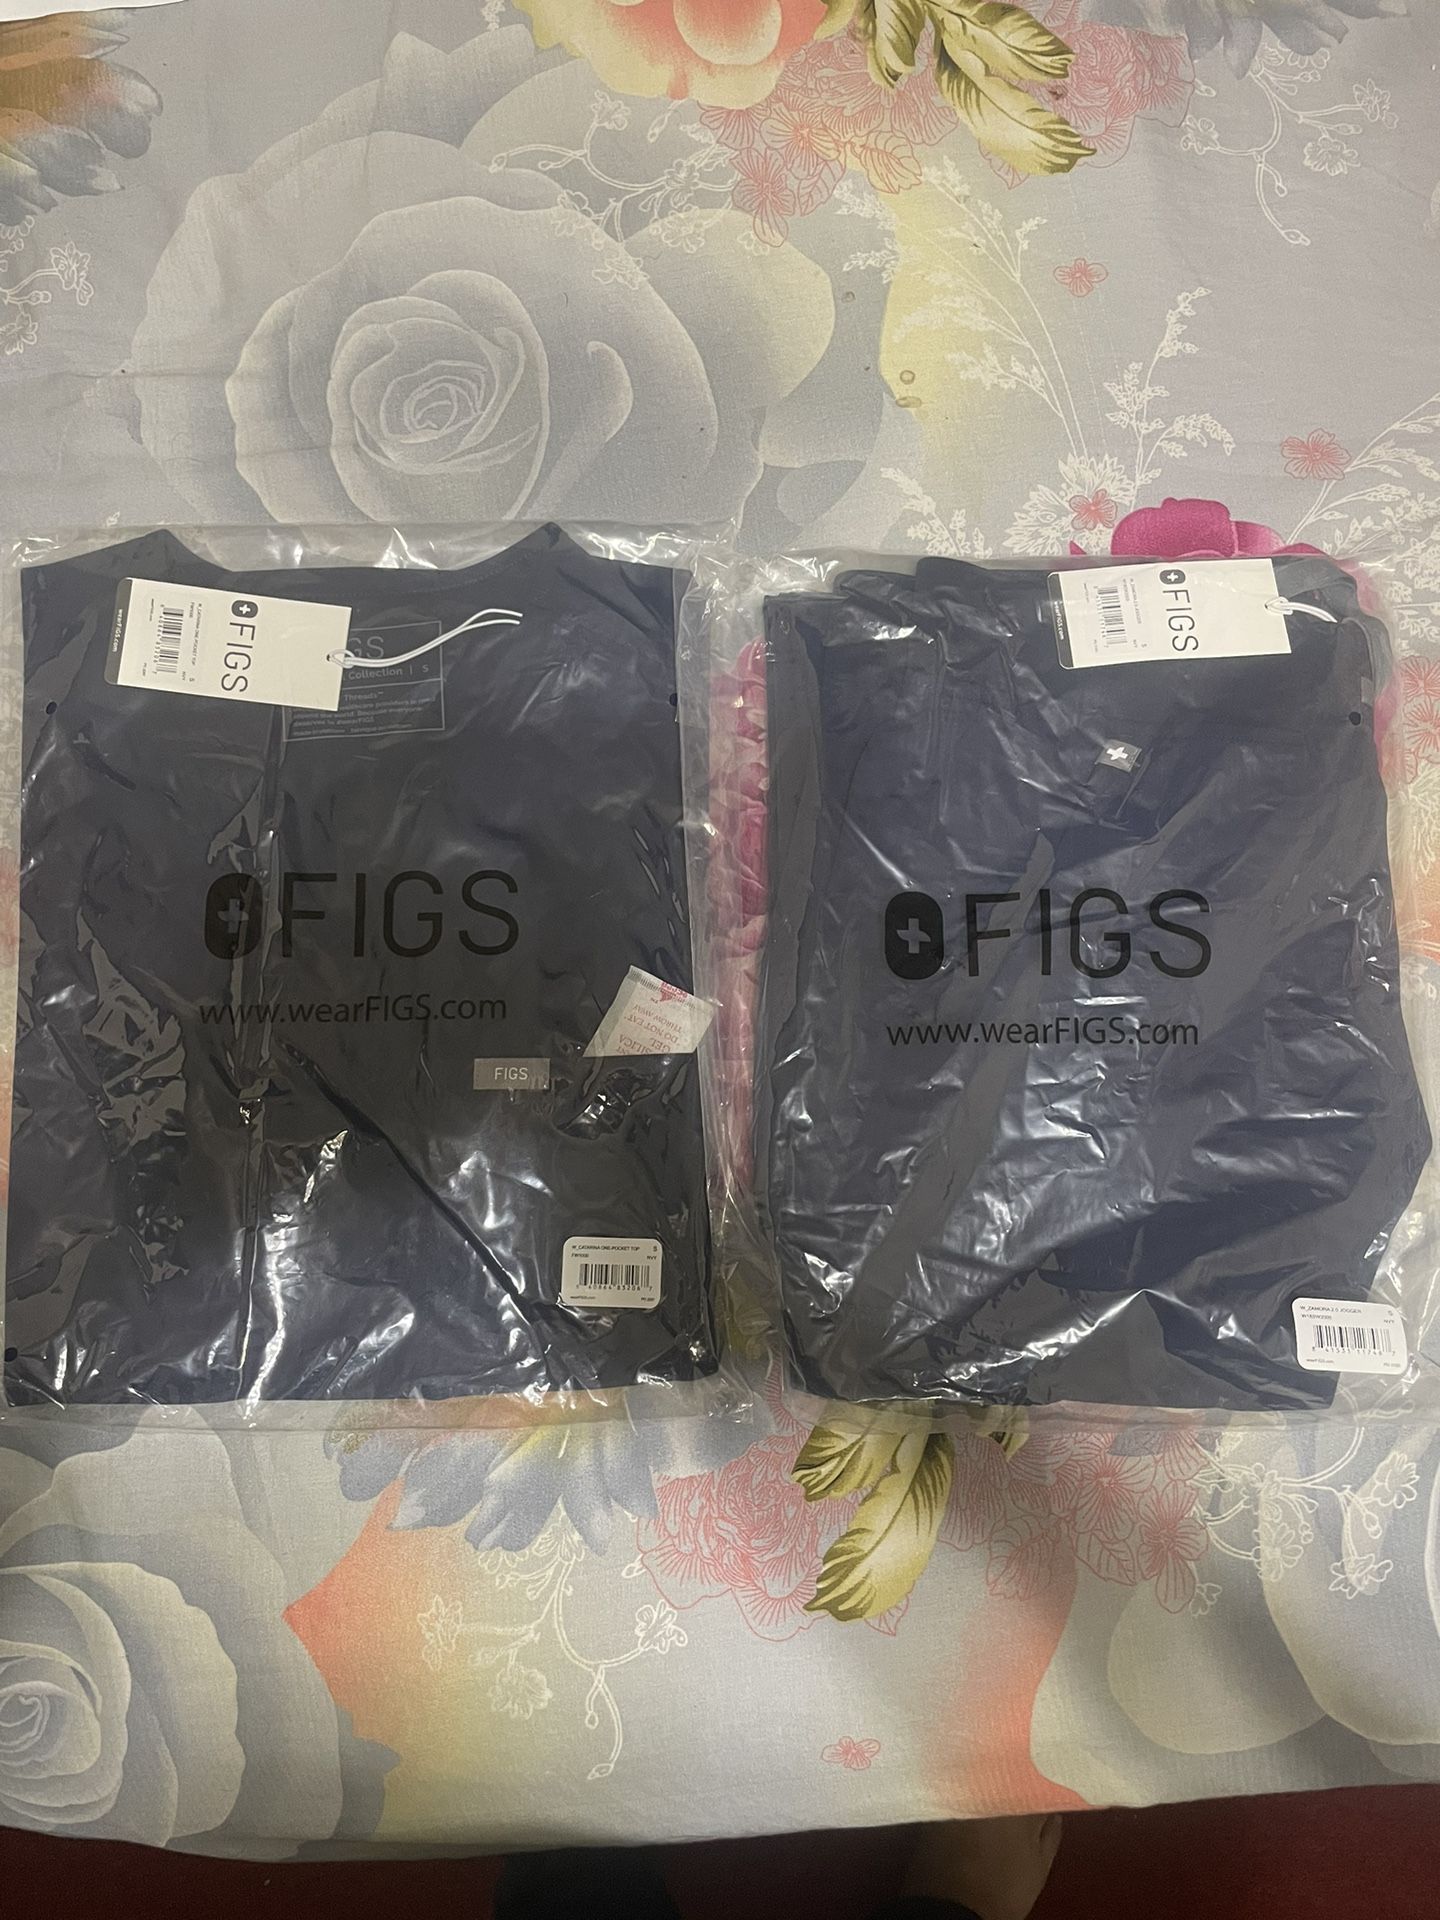 Figs Women’s Scrub Top And Scrub Jogger Pants And Black Scrub Jacket. (Brand New Never Opened) ( Size Small - Navy)